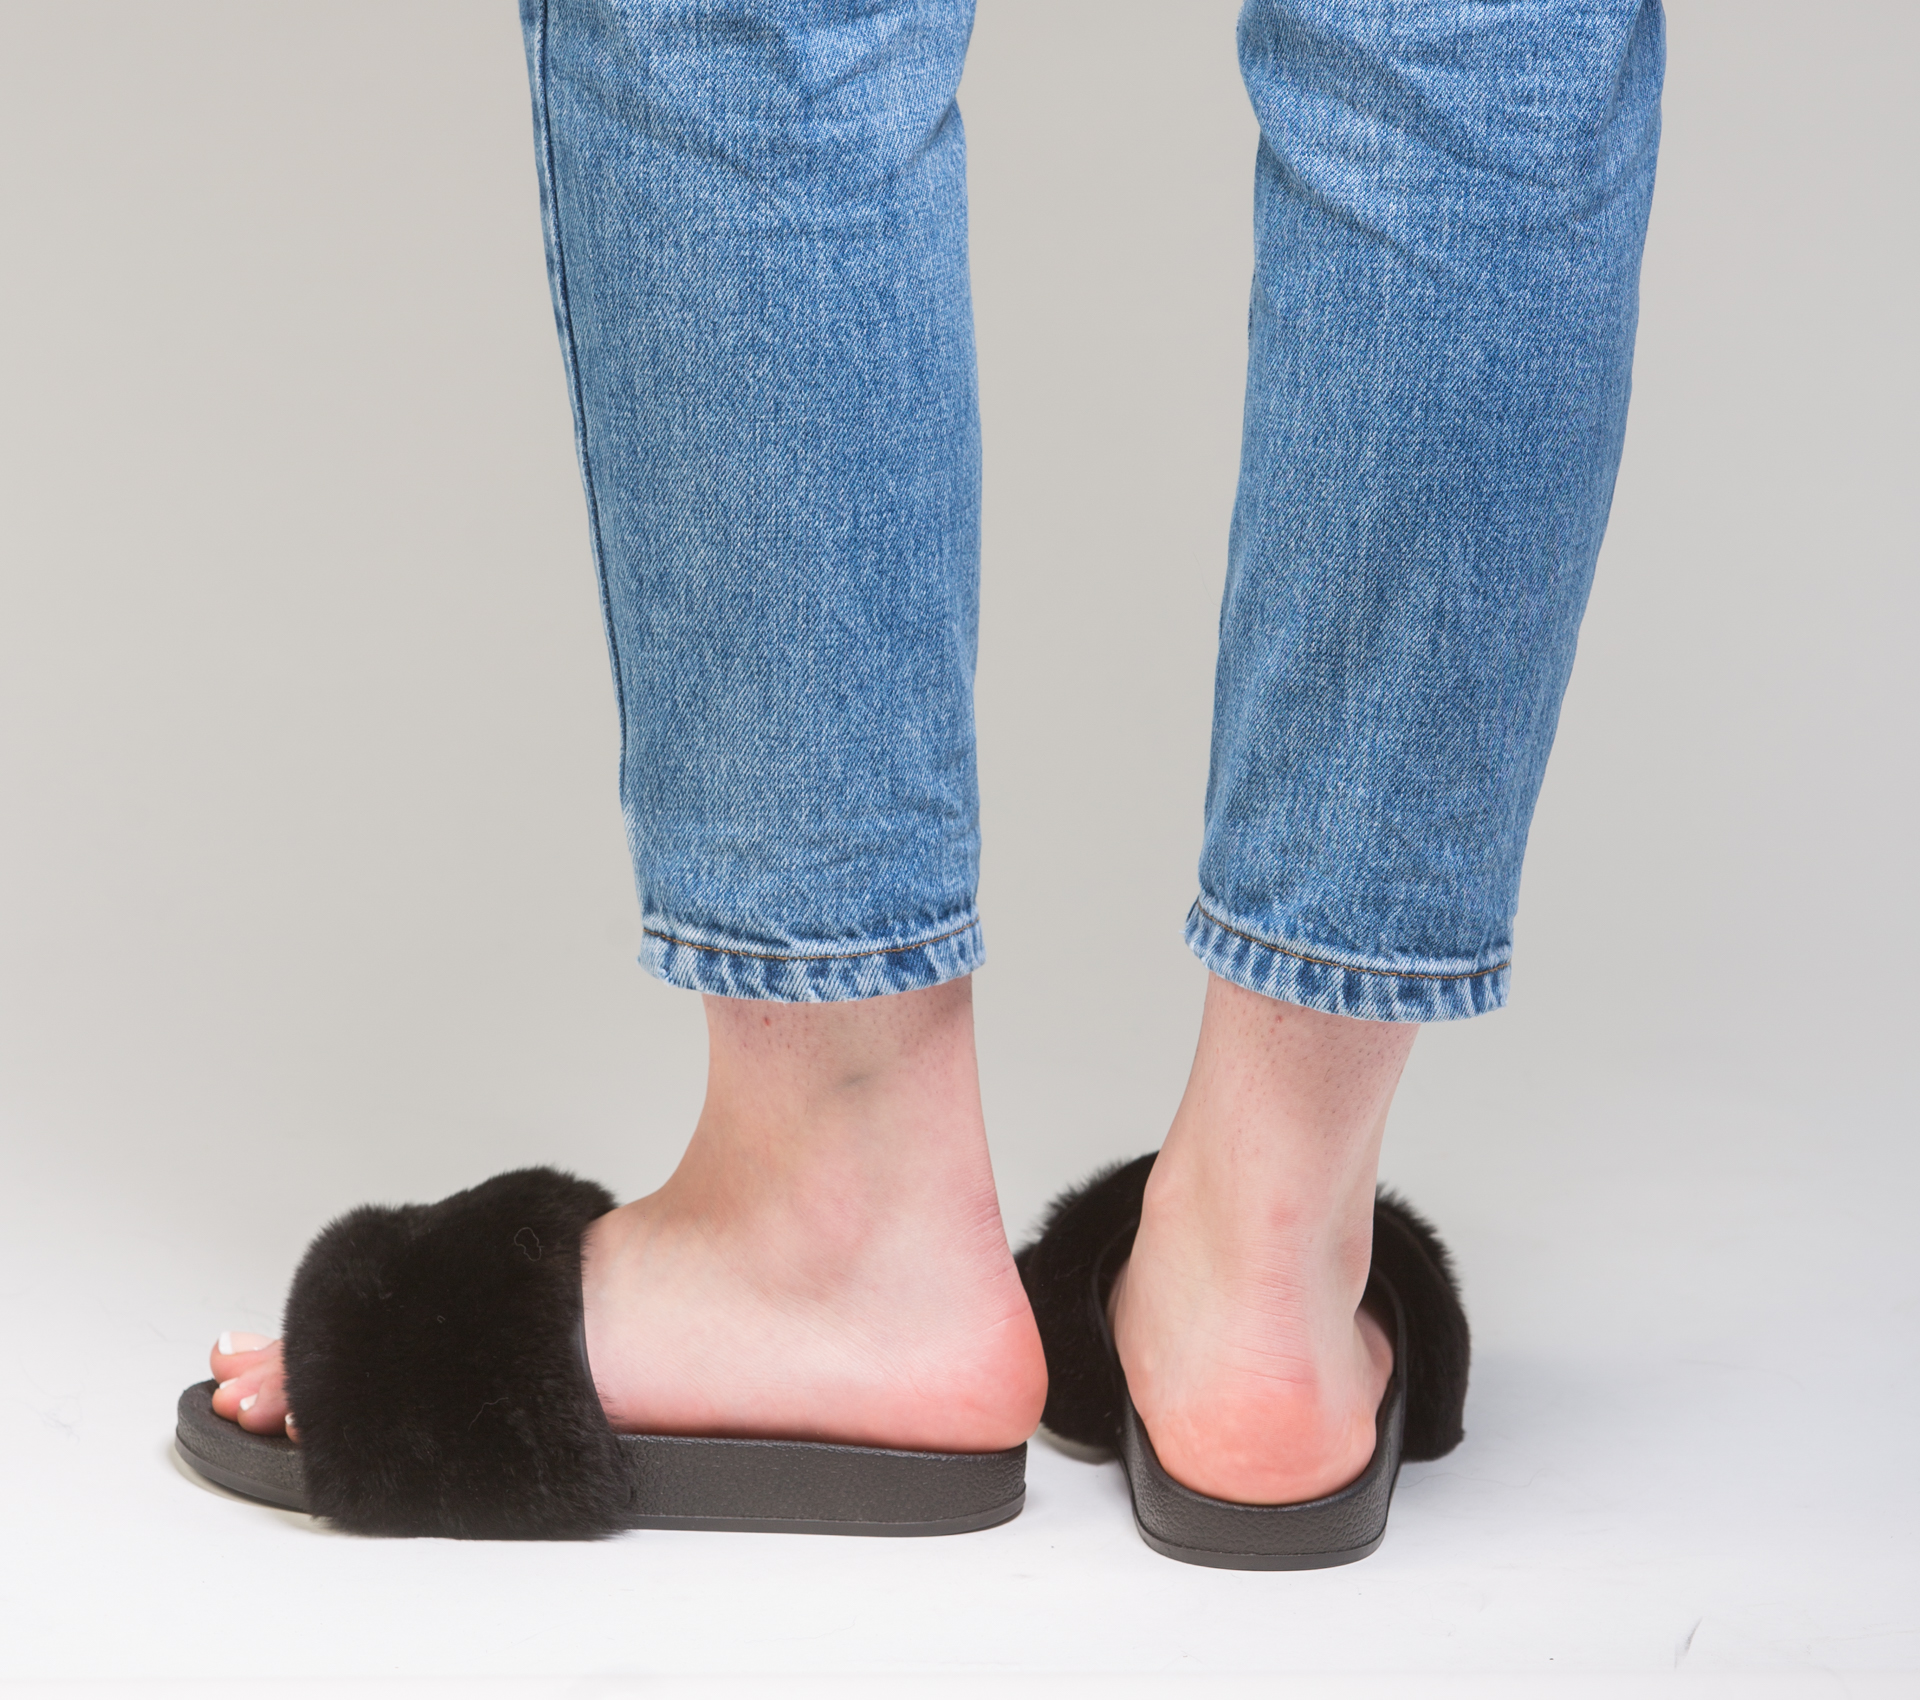 Black Fur Slides. Made of 100% Real Fur. All Sizes Available.